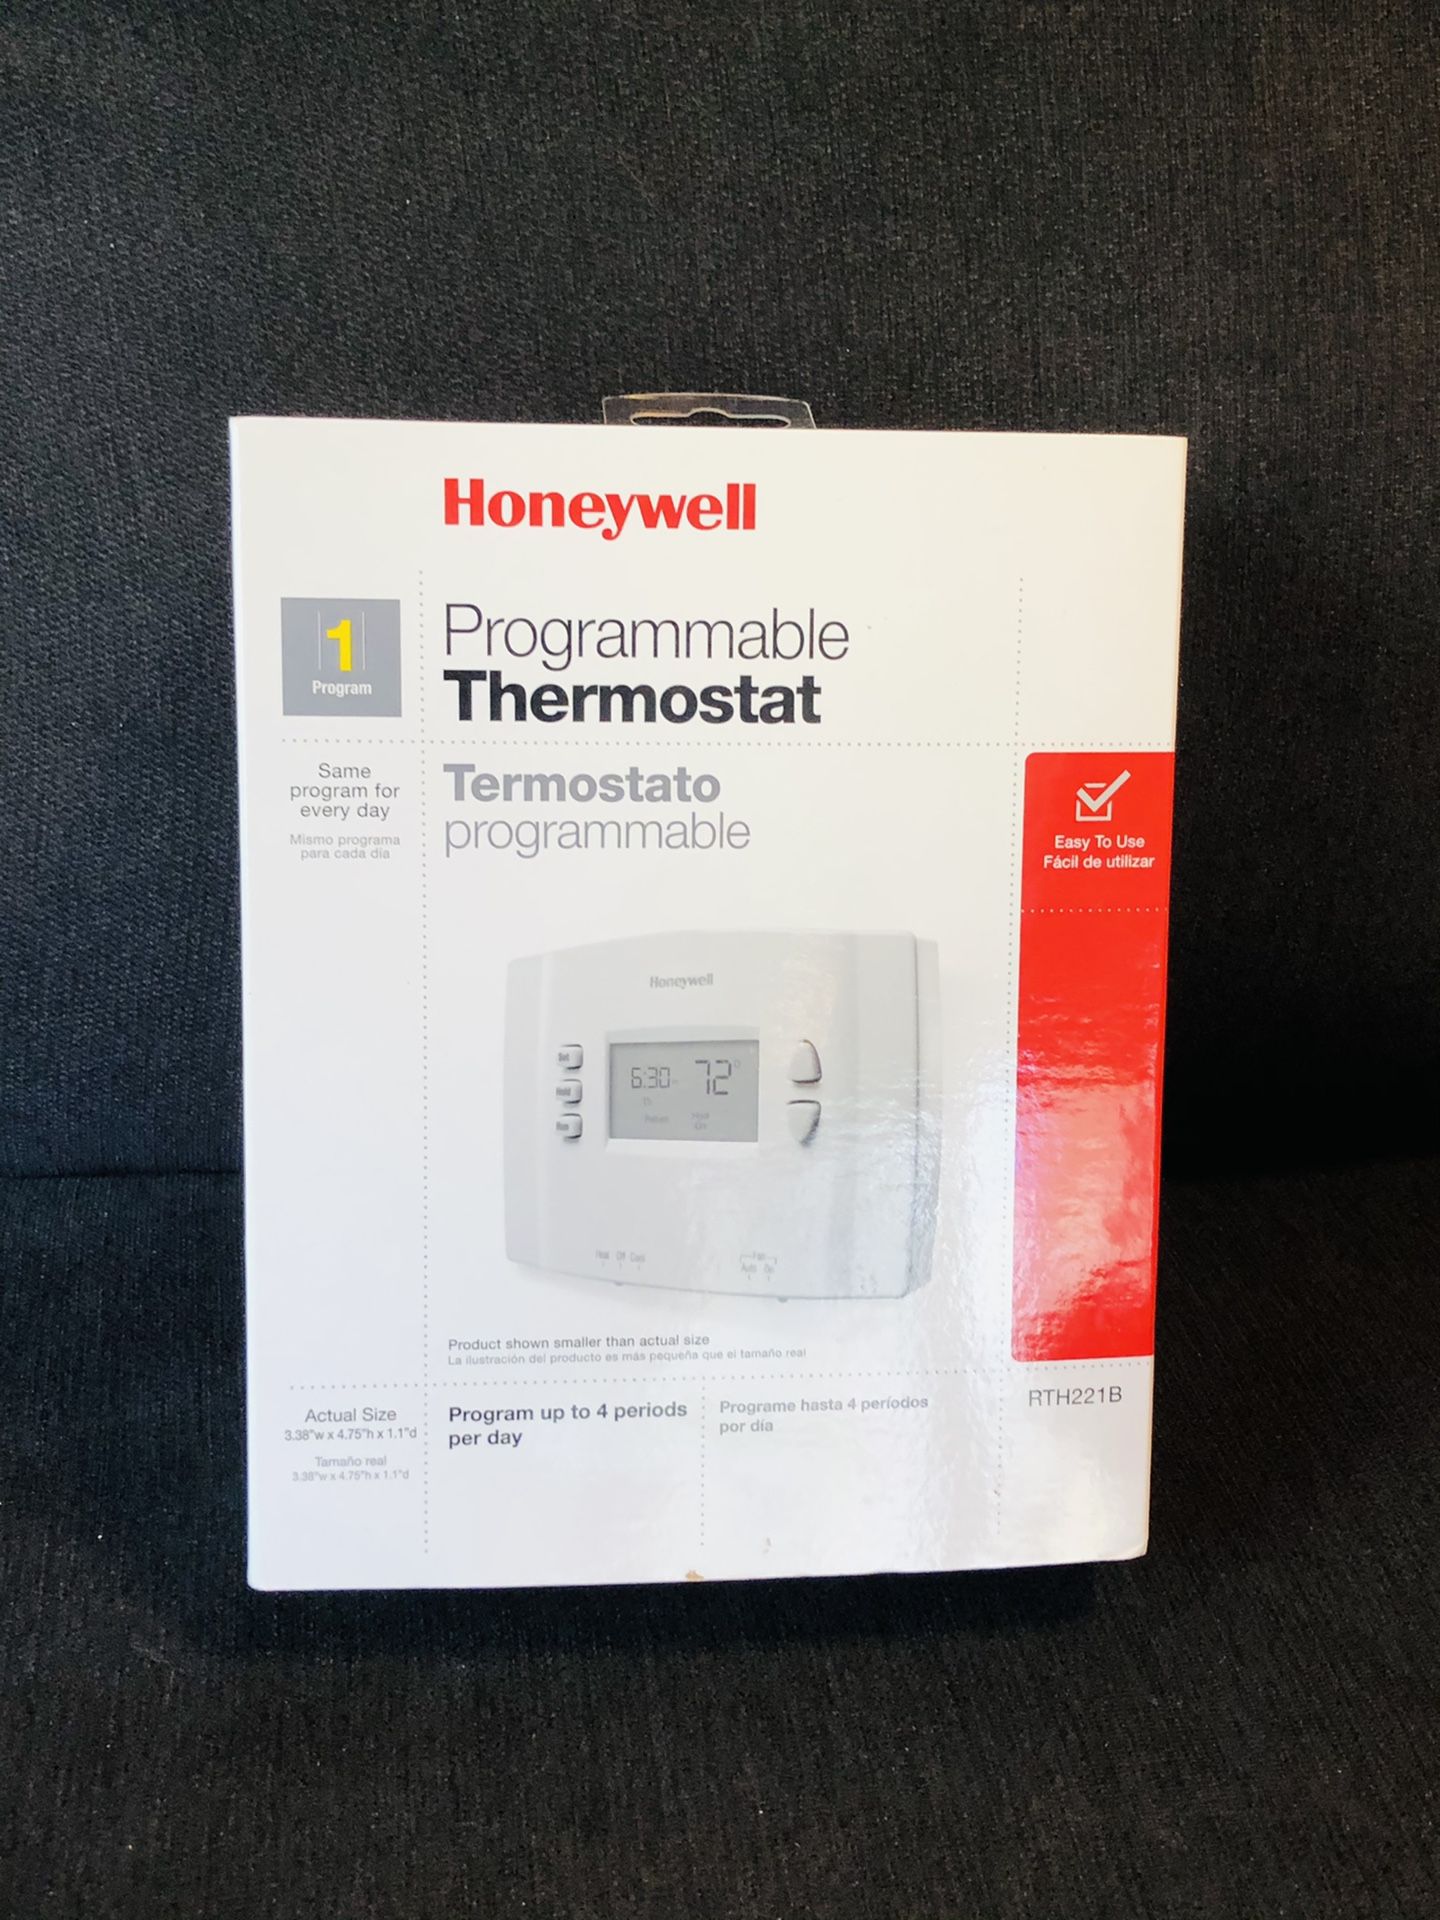 Honey well programmable thermostat